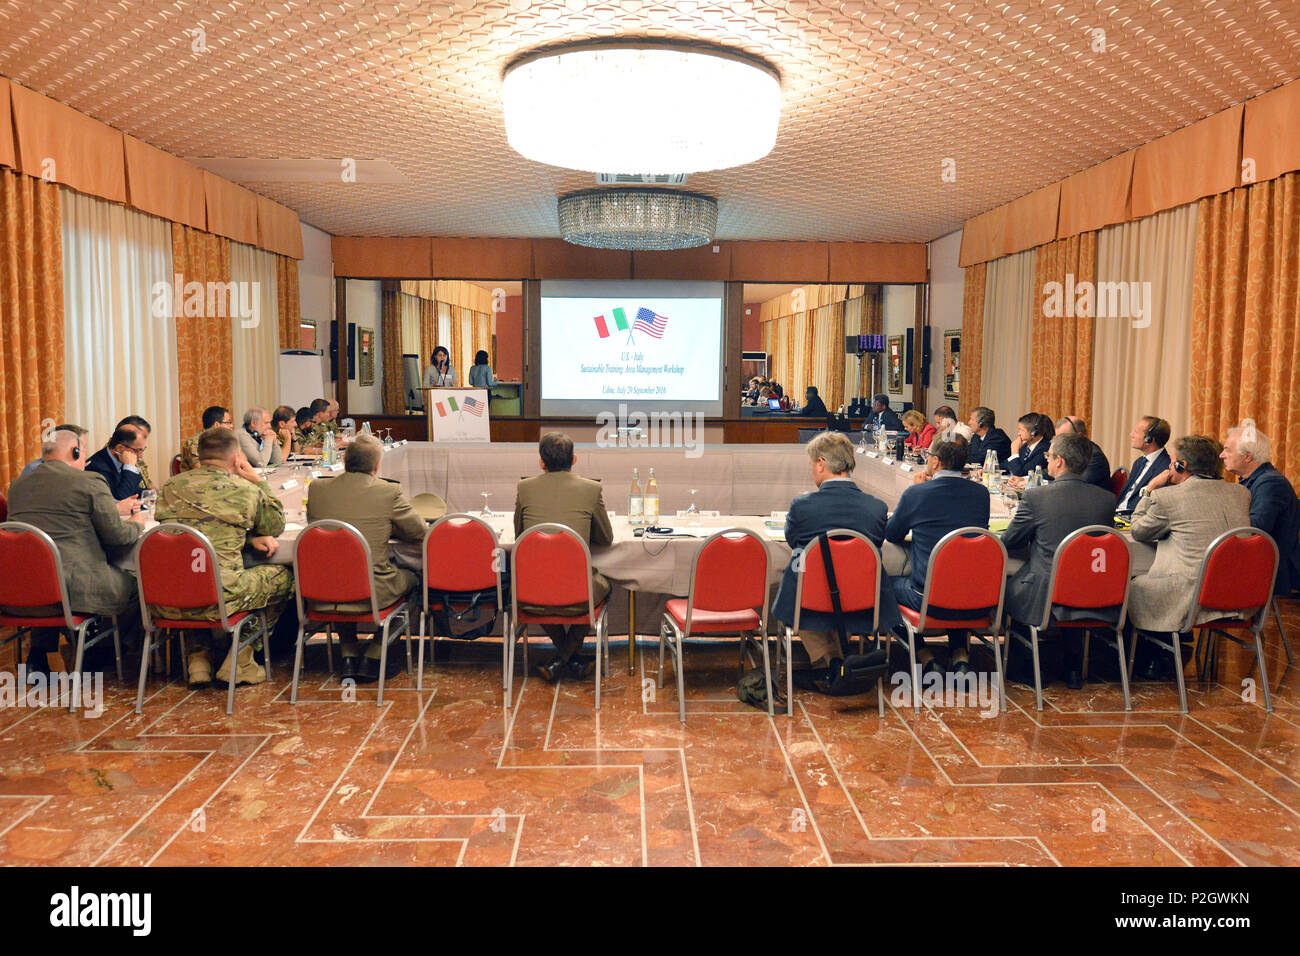 Dott.ssa Mariagrazia Santoro, from Region Friuli Venezia Giulia, addresses members of United States Army, the Italian Army, Italian authorities and Italian Civilians from 12th Infrastructure Command on Sustainable Training Area Management Programs, in Udine, Italy, 20 Sept. 2016. (U.S. Army photo by Visual Information Specialist Paolo Bovo/Released) Stock Photo